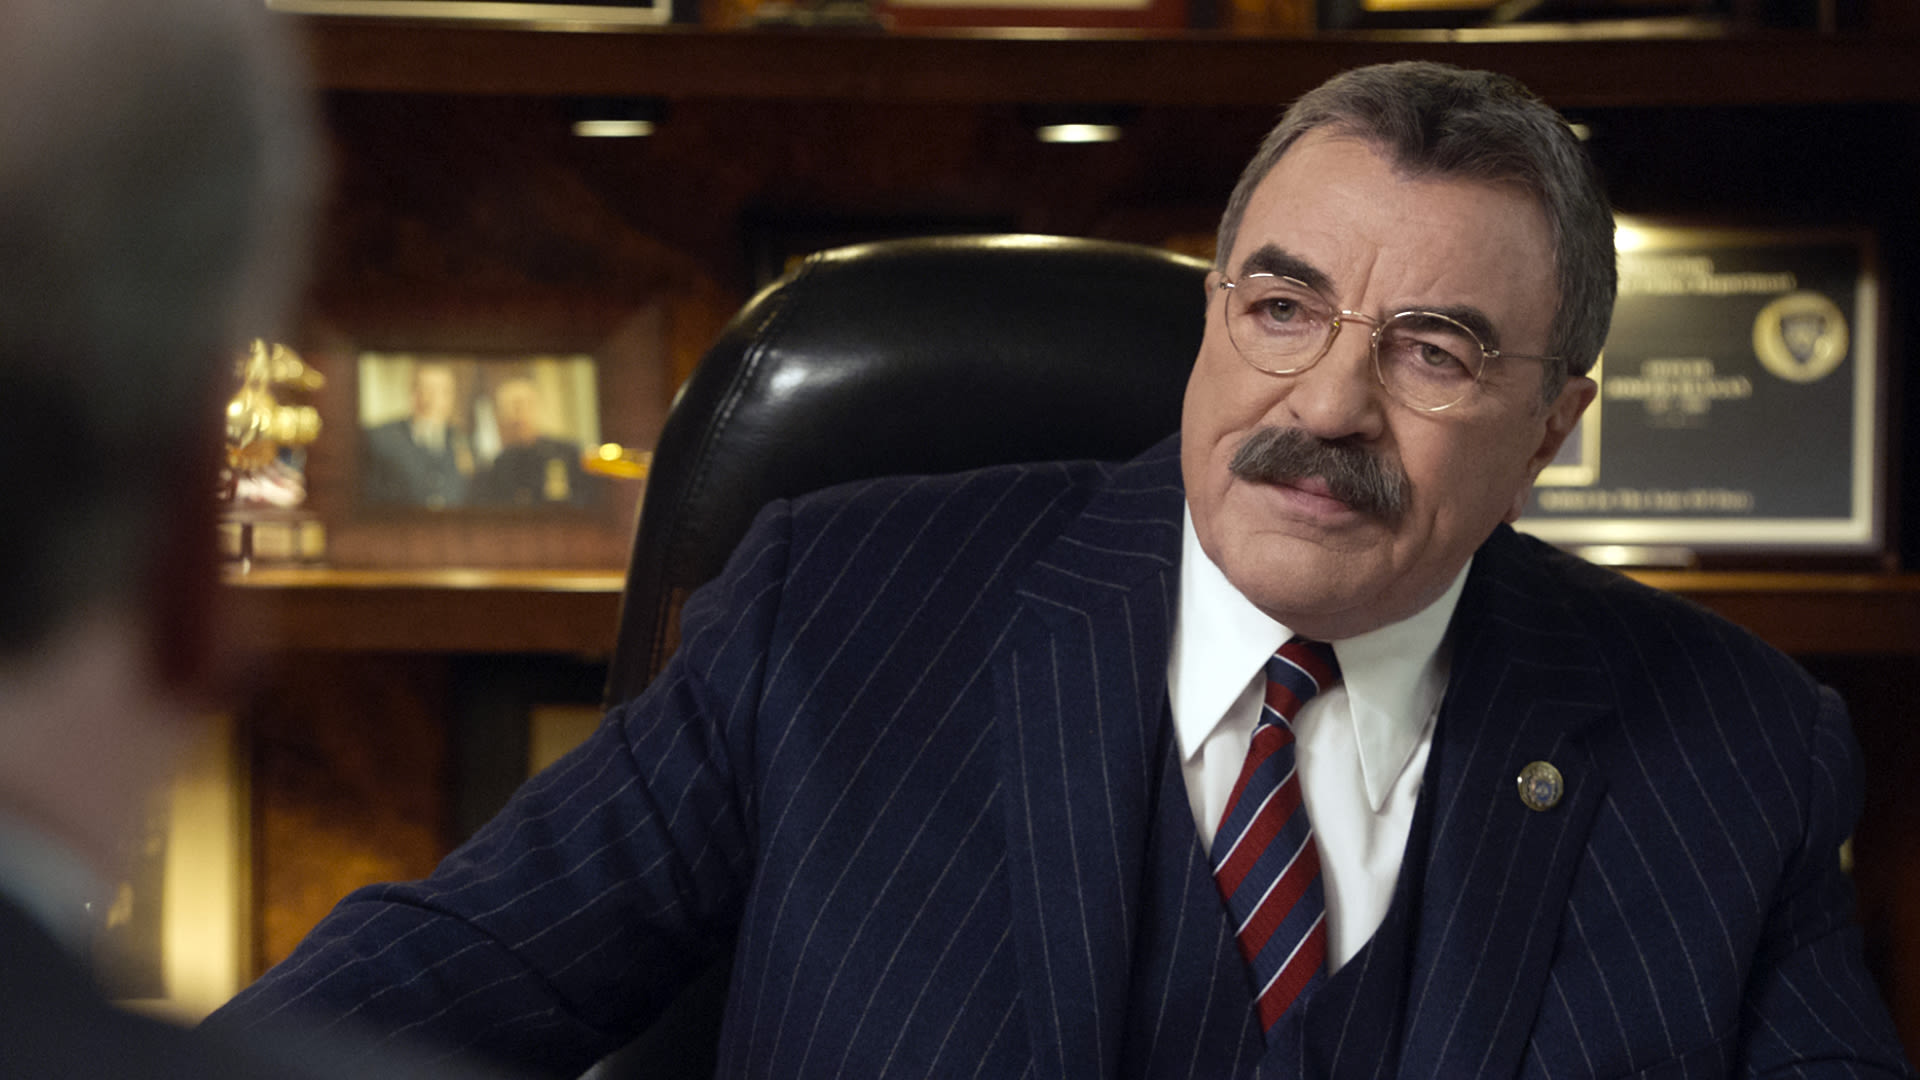 Tom Selleck hopes CBS execs 'come to their senses' and save 'Blue Bloods' from cancellation